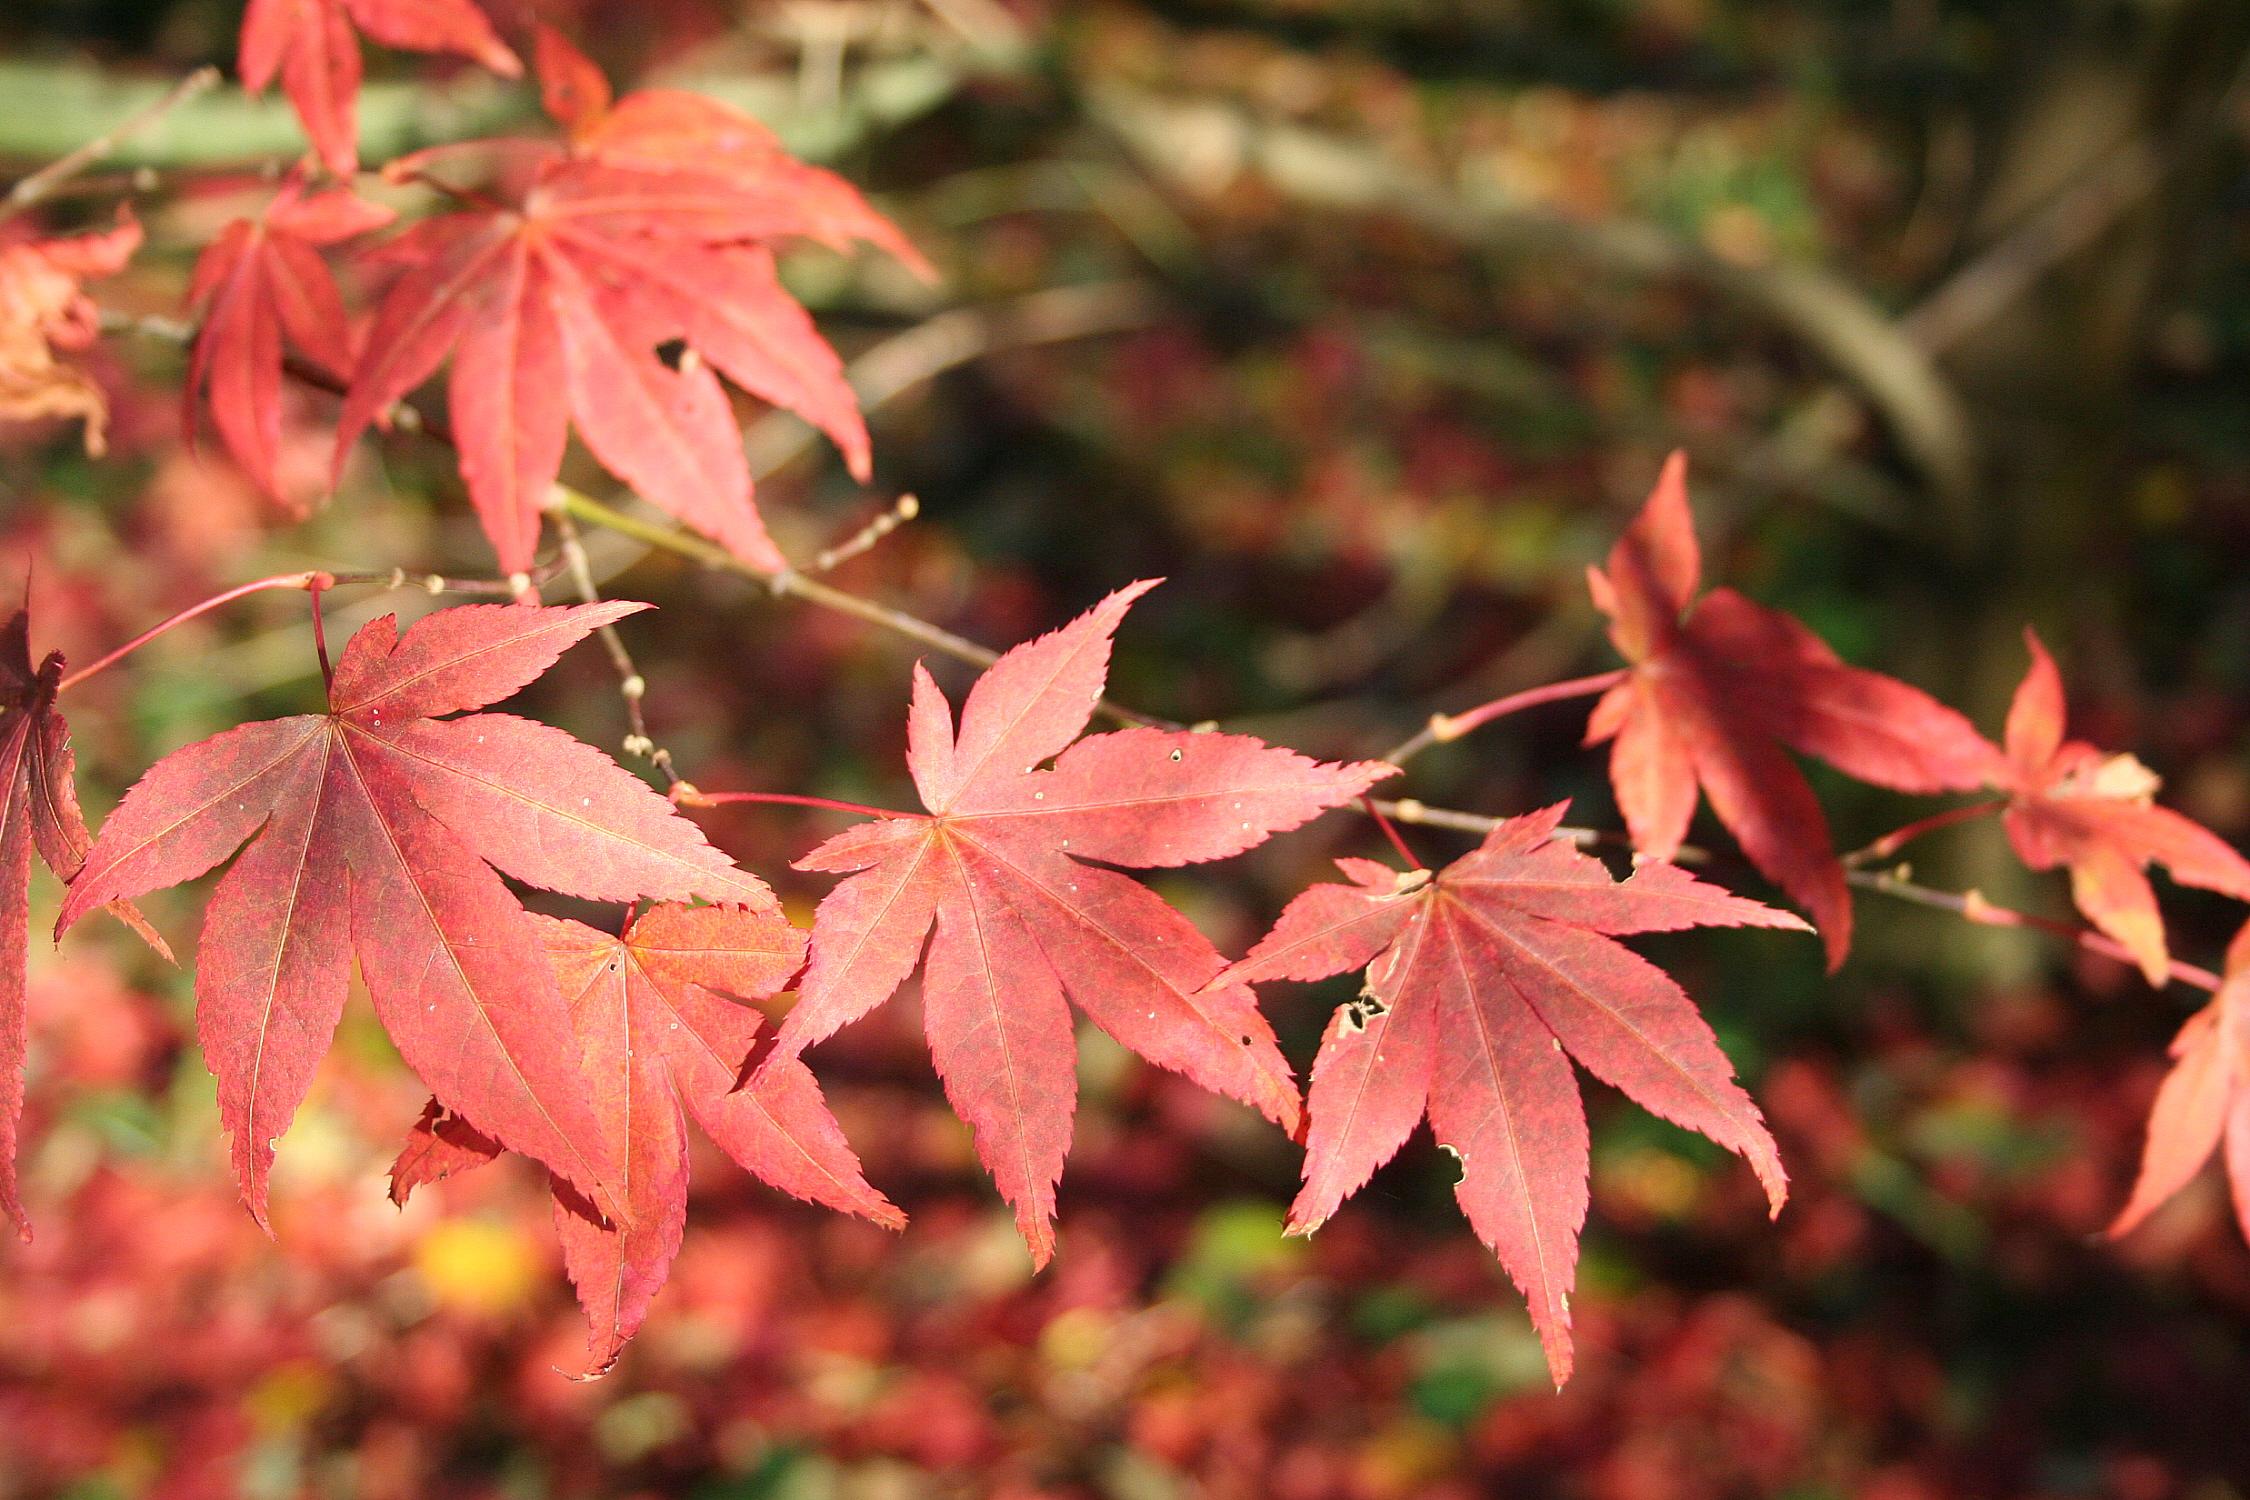 red-orange leaves with red petioles and beige stems